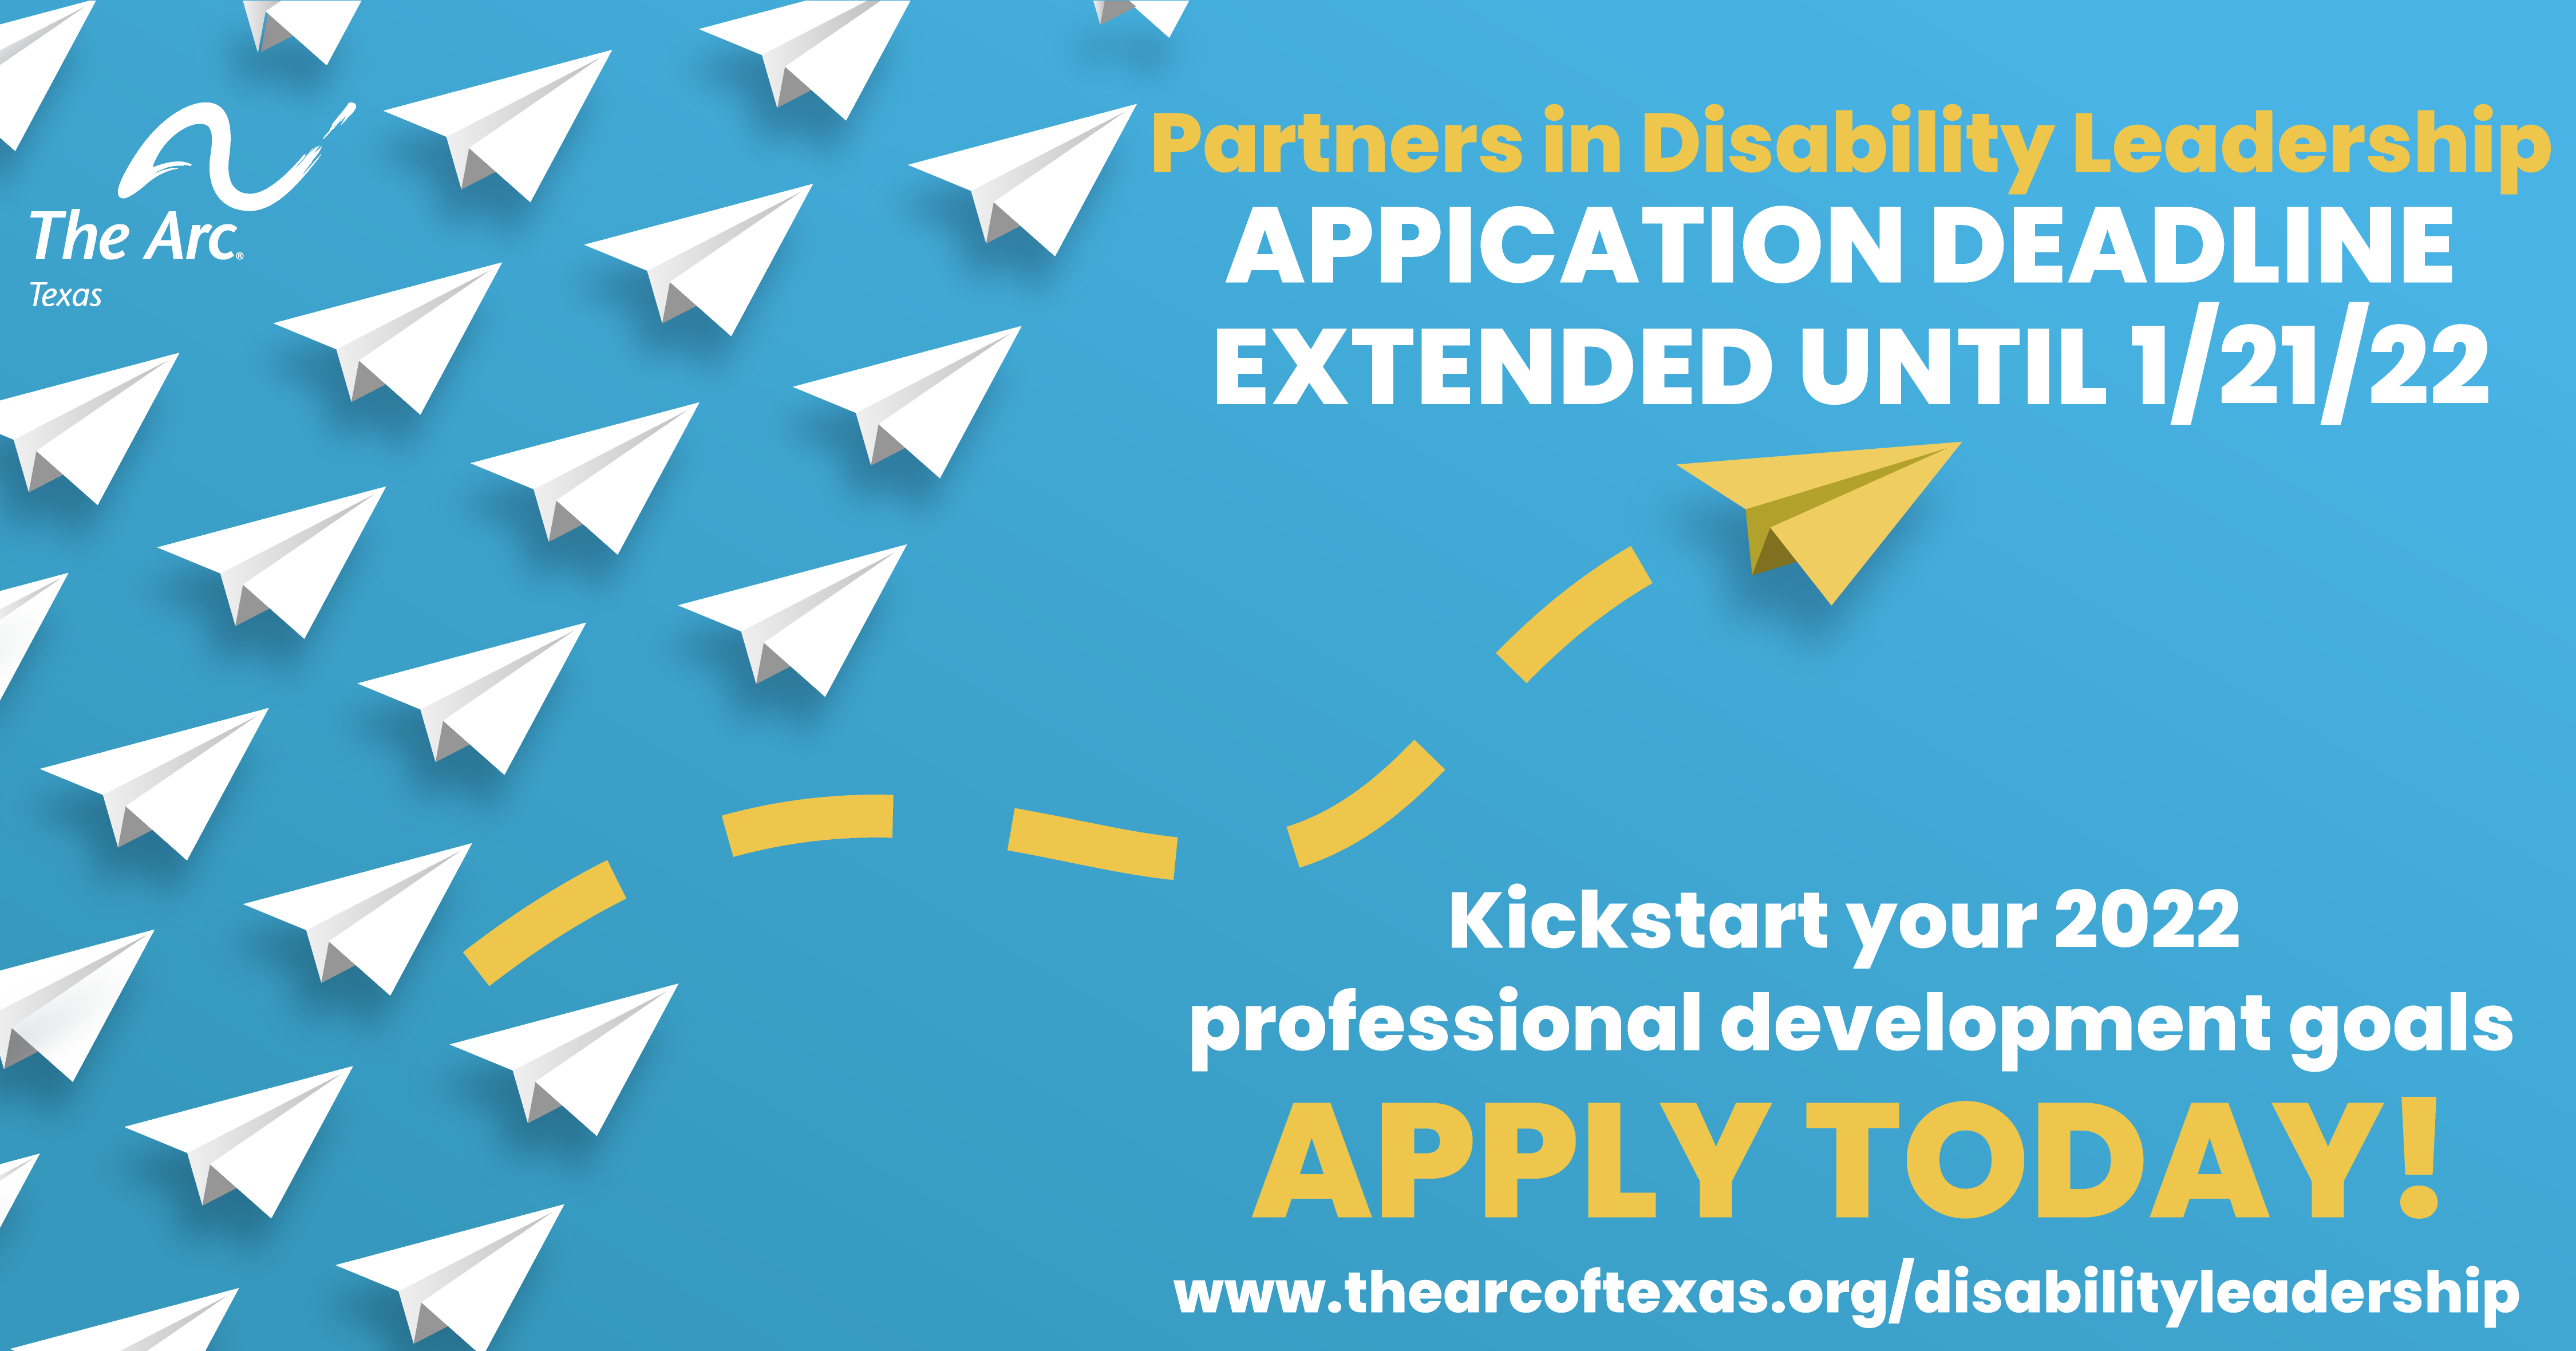 Light blue background with white paper airplanes in a straight line pointing to the right. One yellow paper airplane has left the line and is soaring tothe upper-right corner of the image. The Arc of Texas logo and text that says Apply Now! 2022 Partners in Disability Leadership www.thearcoftexas.org/disabilityleadership